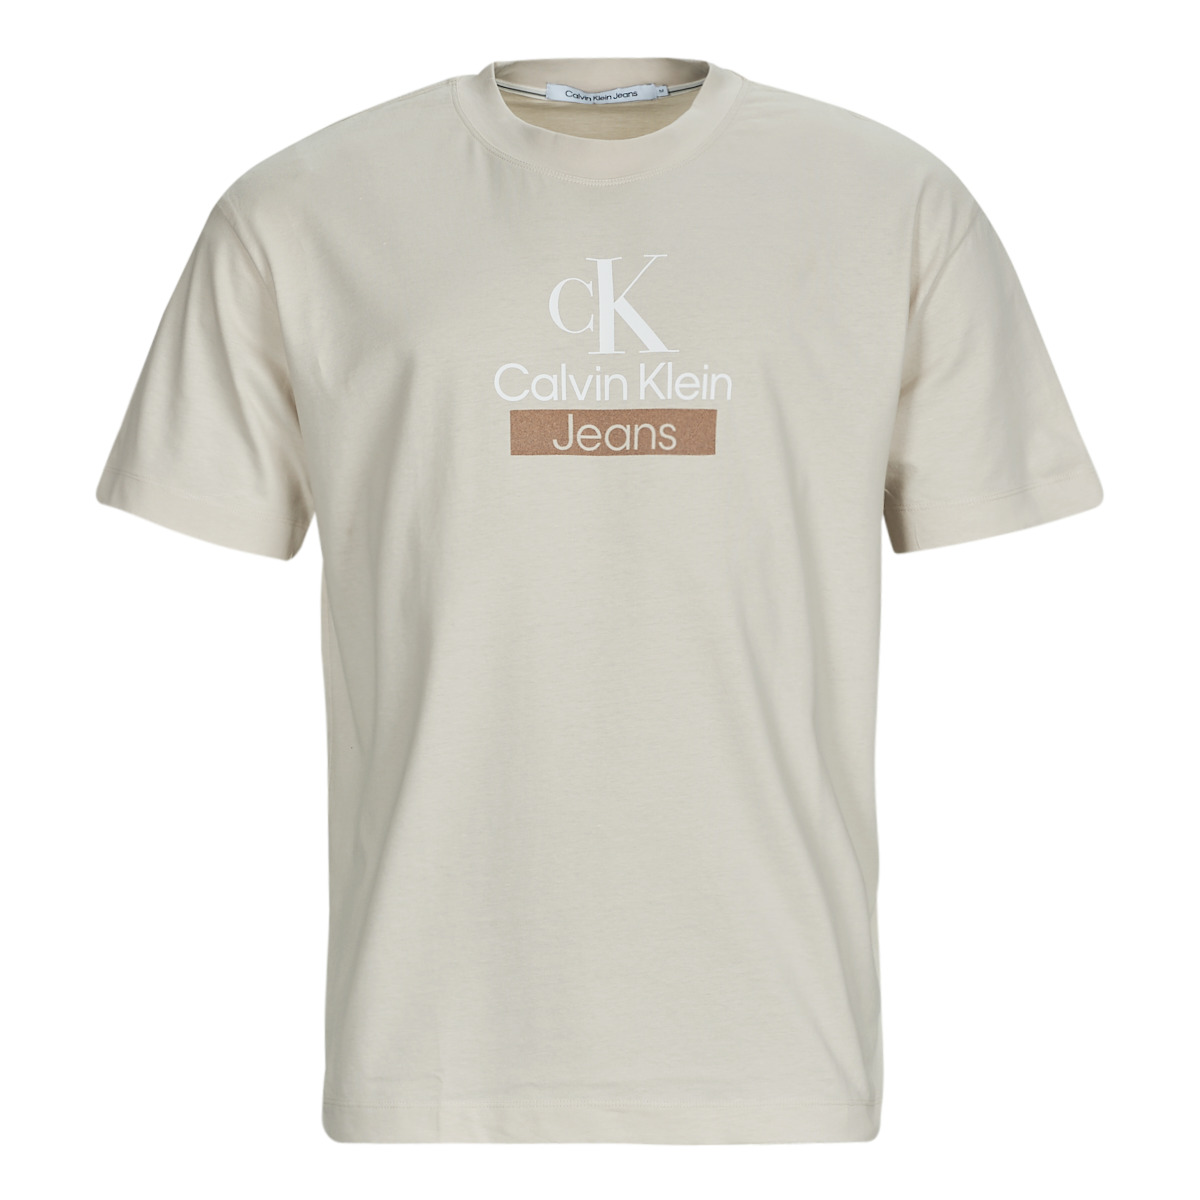 Calvin Klein Jeans STACKED ARCHIVAL NET - Spartoo delivery ! Men Free TEE t-shirts | - Clothing Beige short-sleeved